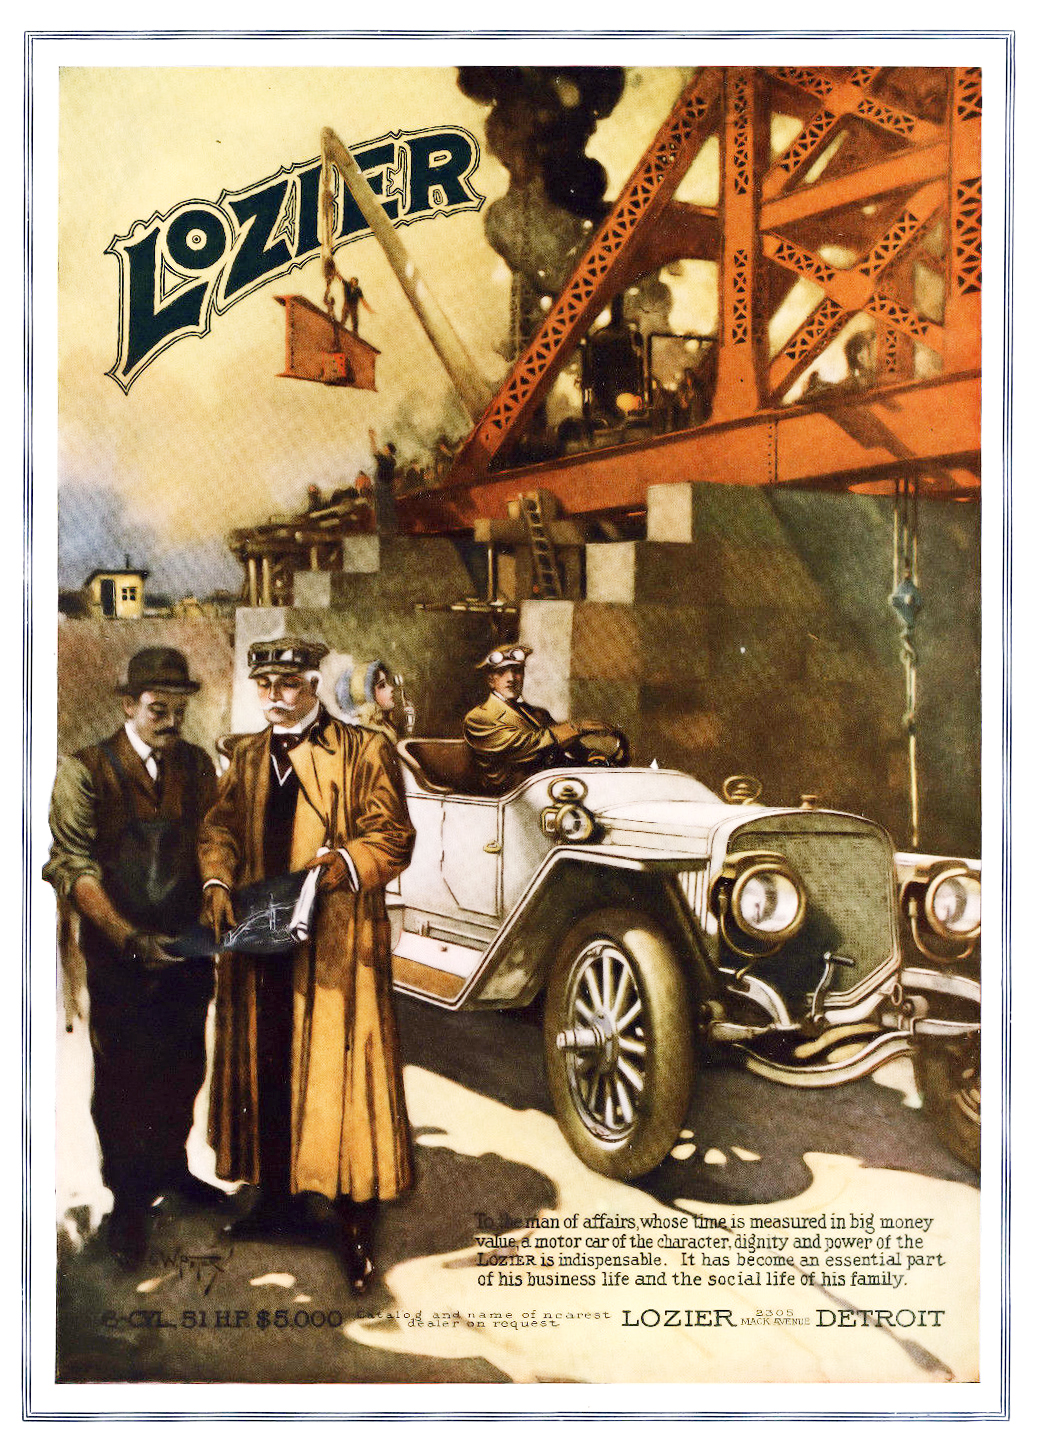 Lozier Touring Car Ad (1912): Left-handed car - To the man of affairs, whose time is measured in big money value... - Illustrated by G.W.Peters